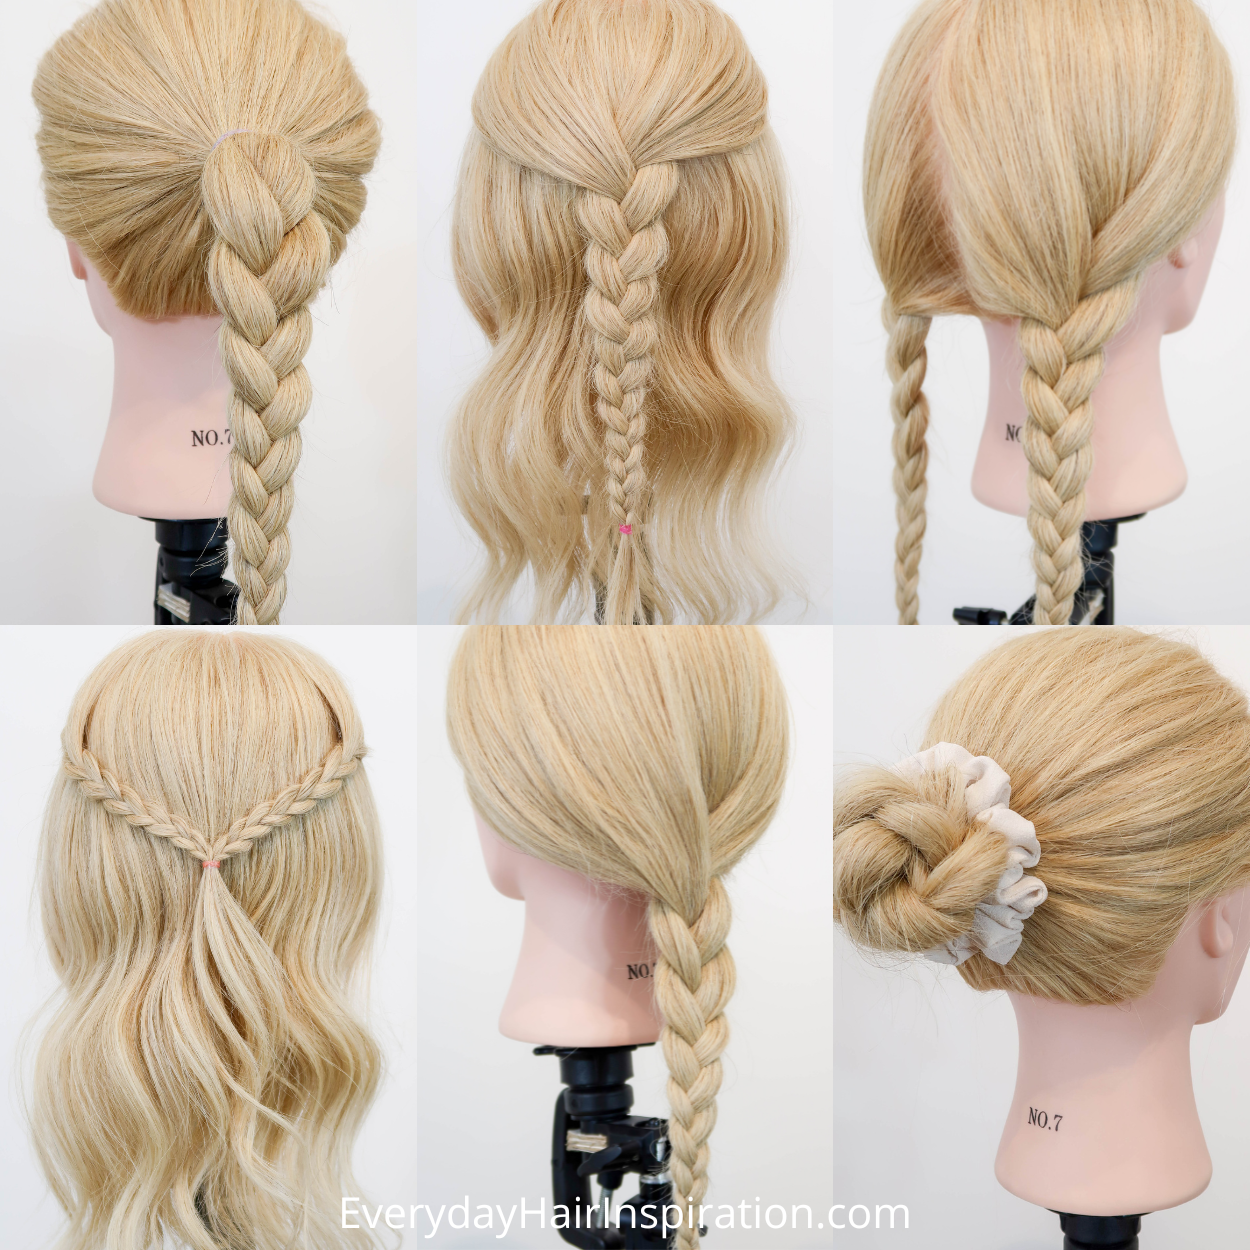 4 Ways to Do Simple Quick Hairstyles for Long Hair  wikiHow